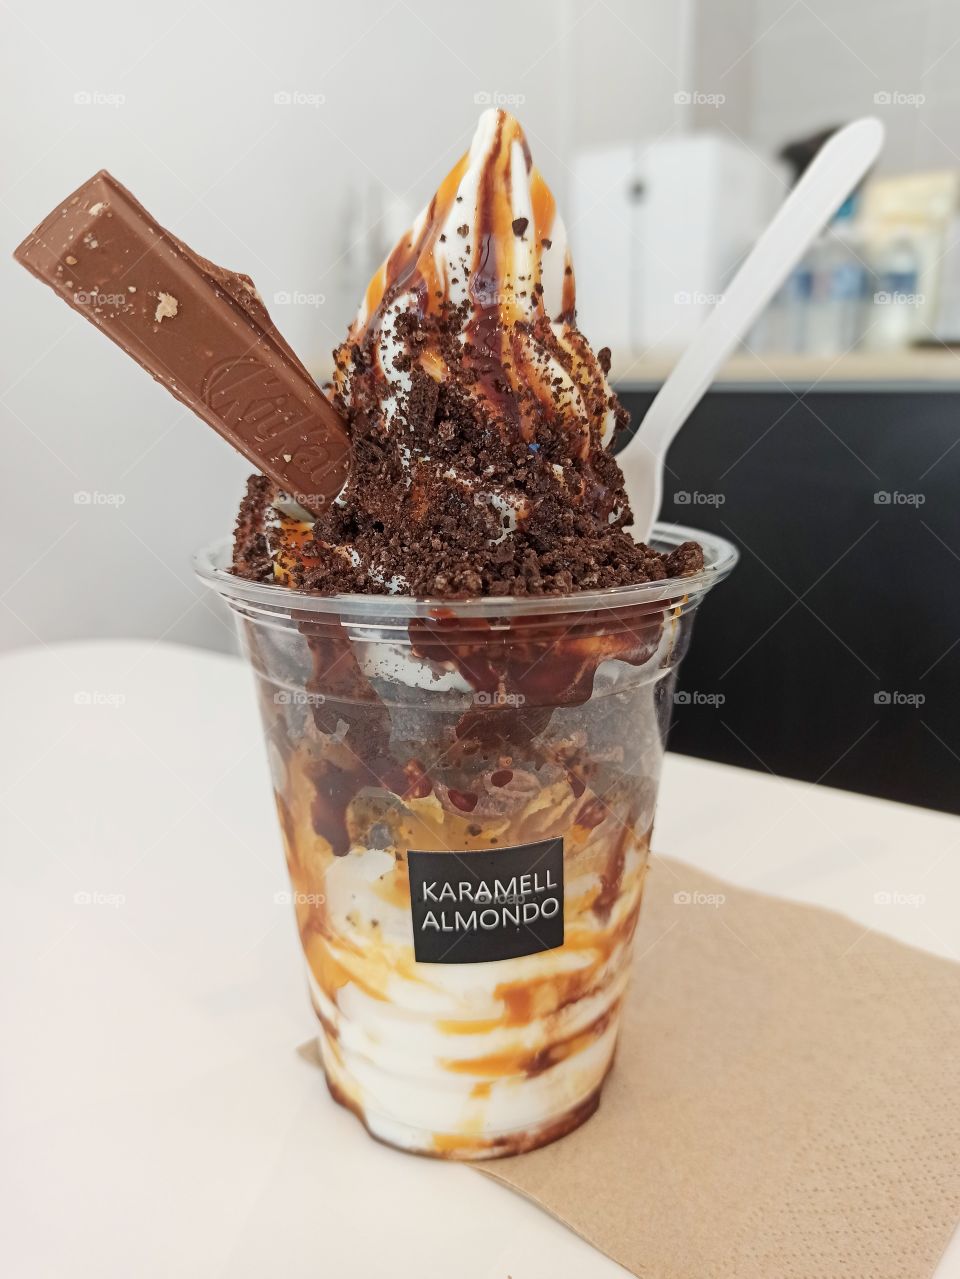 Yogurt Ice cream coated with Caramel, chocolate rice and chocolate cookies served in a plastic cup.